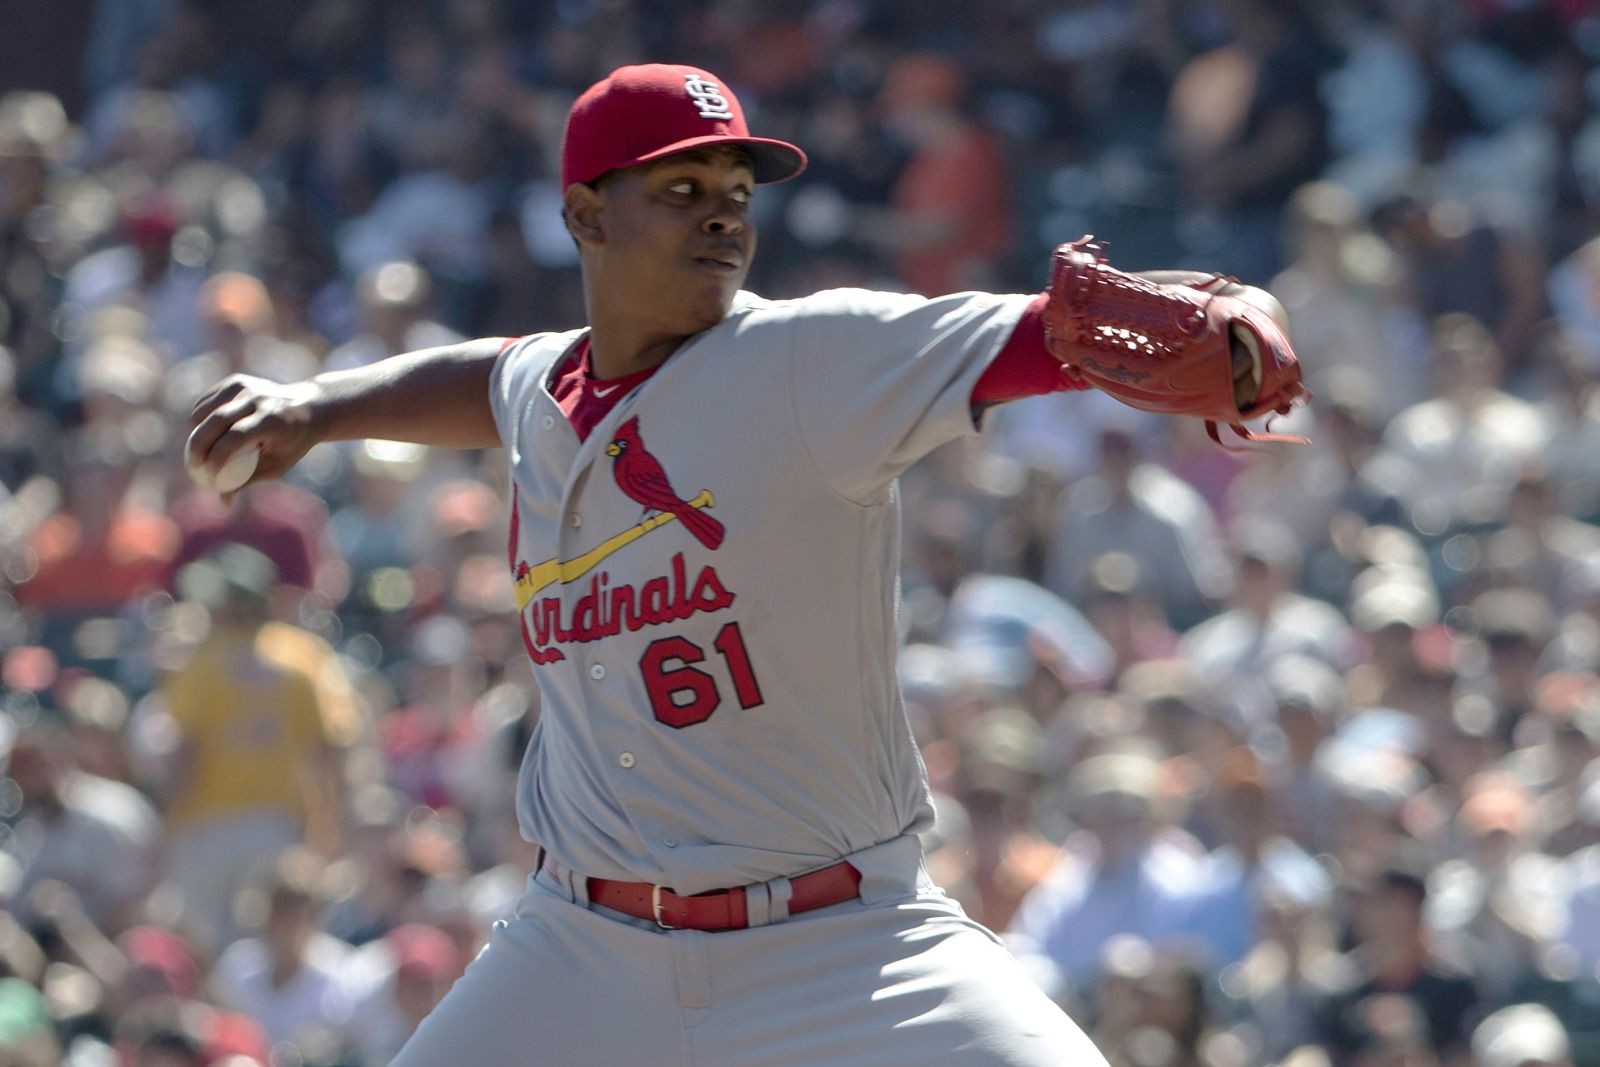 St. Louis Cardinals headlines we will see during the 2020 season